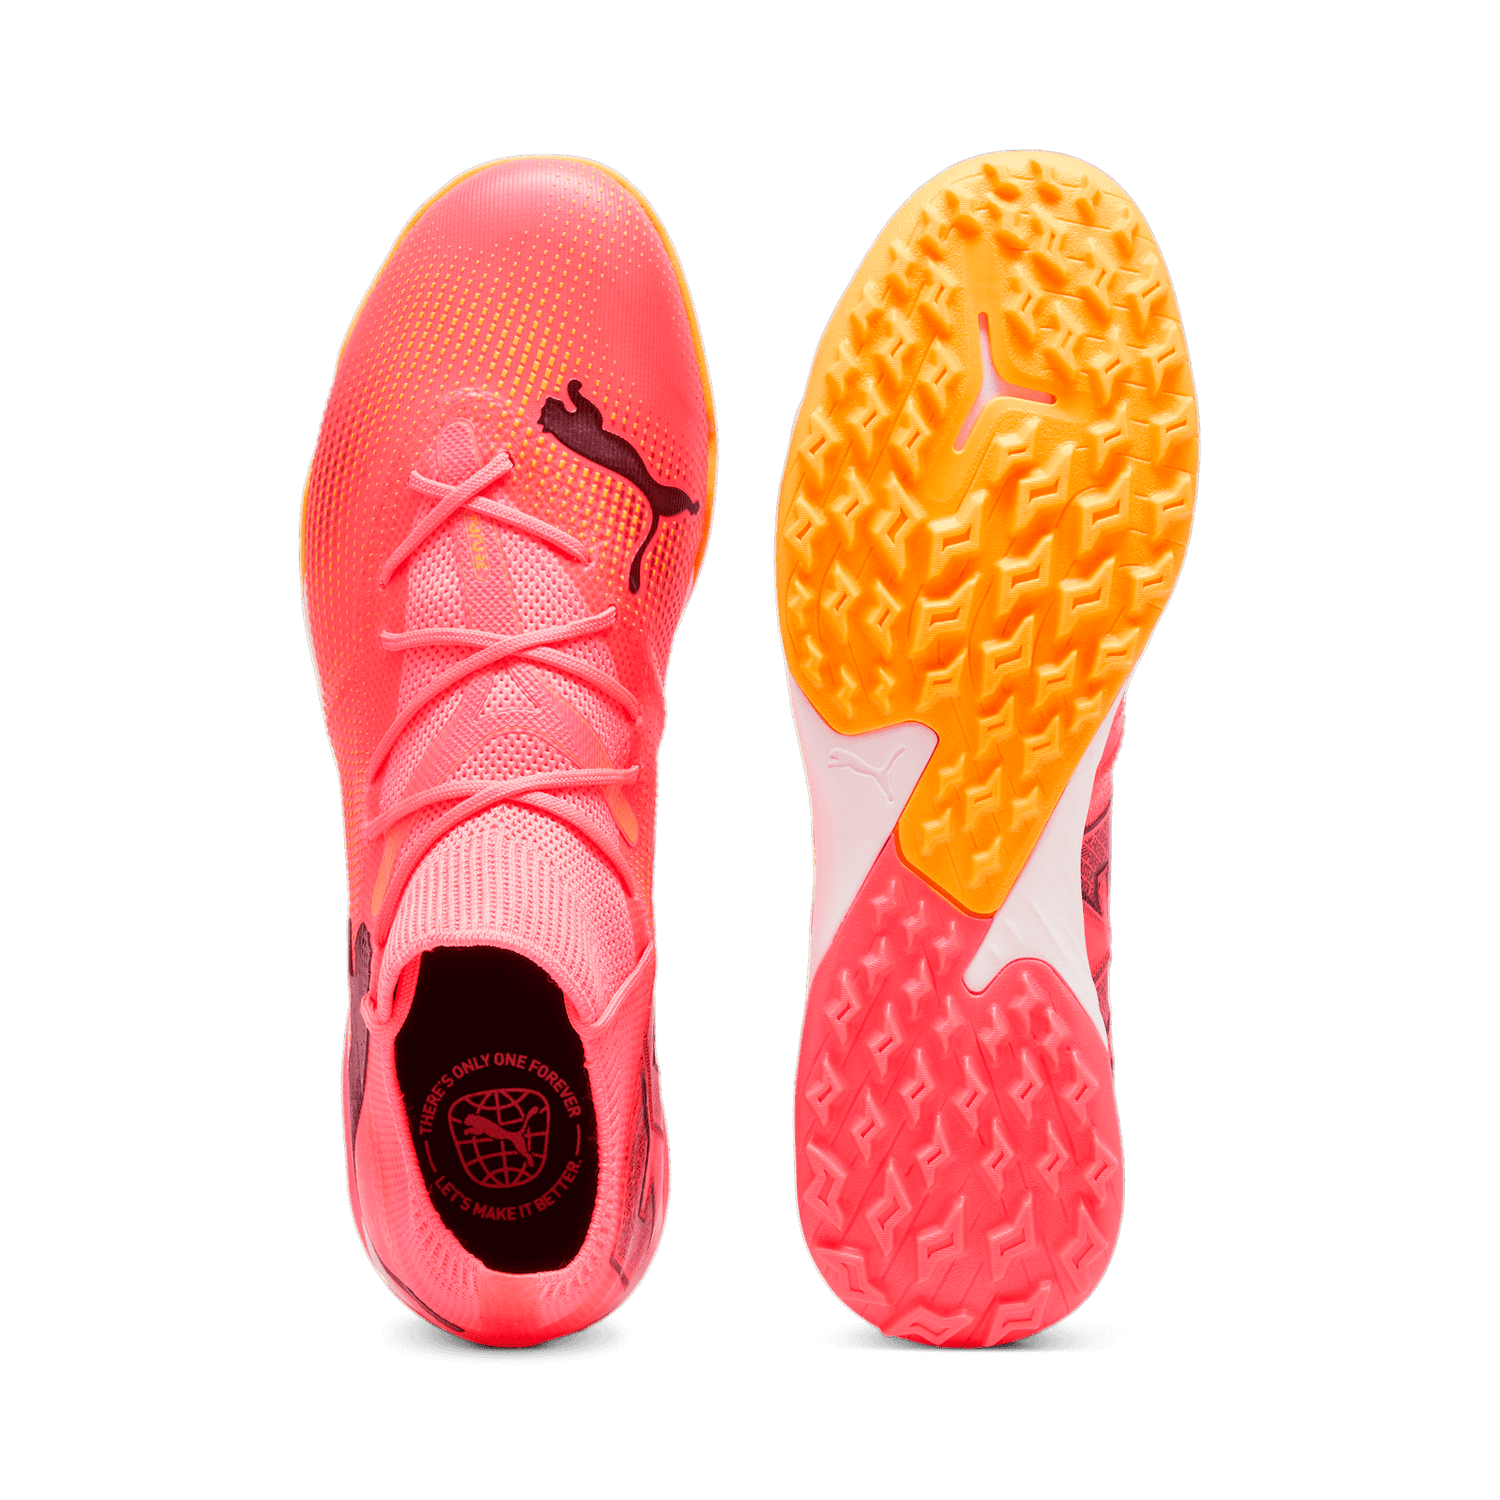 Puma Future 7 Match Turf - Forever Faster Pack (SP24) (Pair - Top and Bottom)